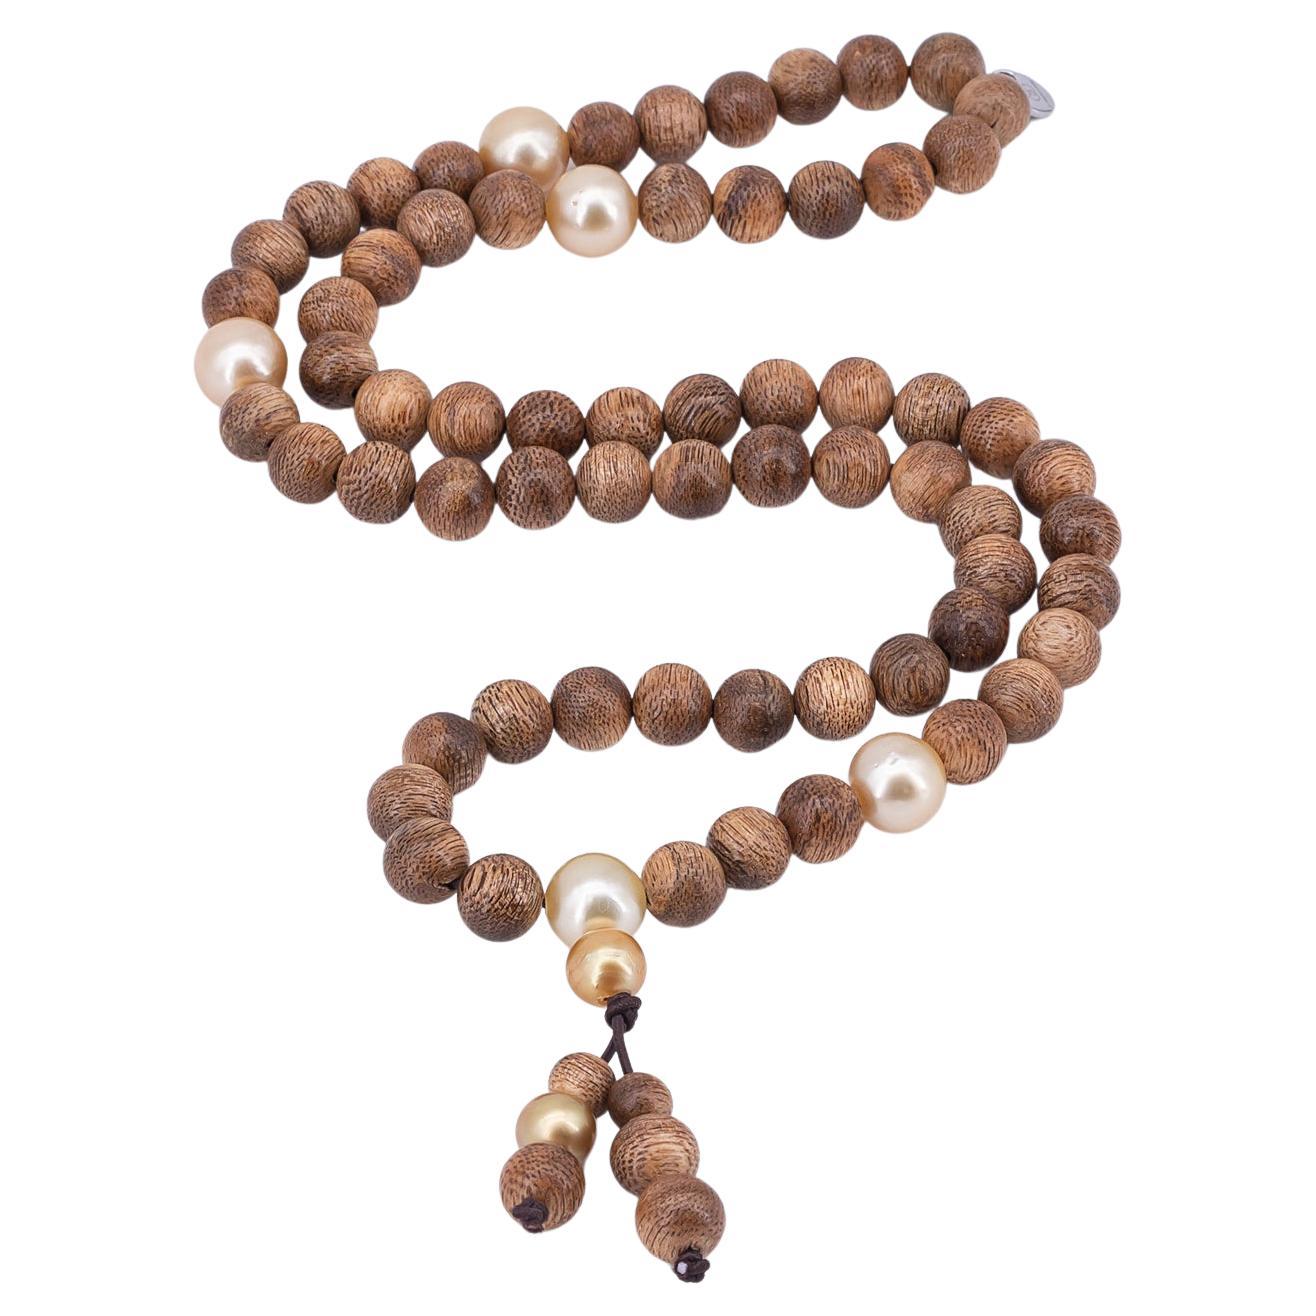 Prayer bracelet/necklace with oud wood beads and Golden South sea pearls For Sale